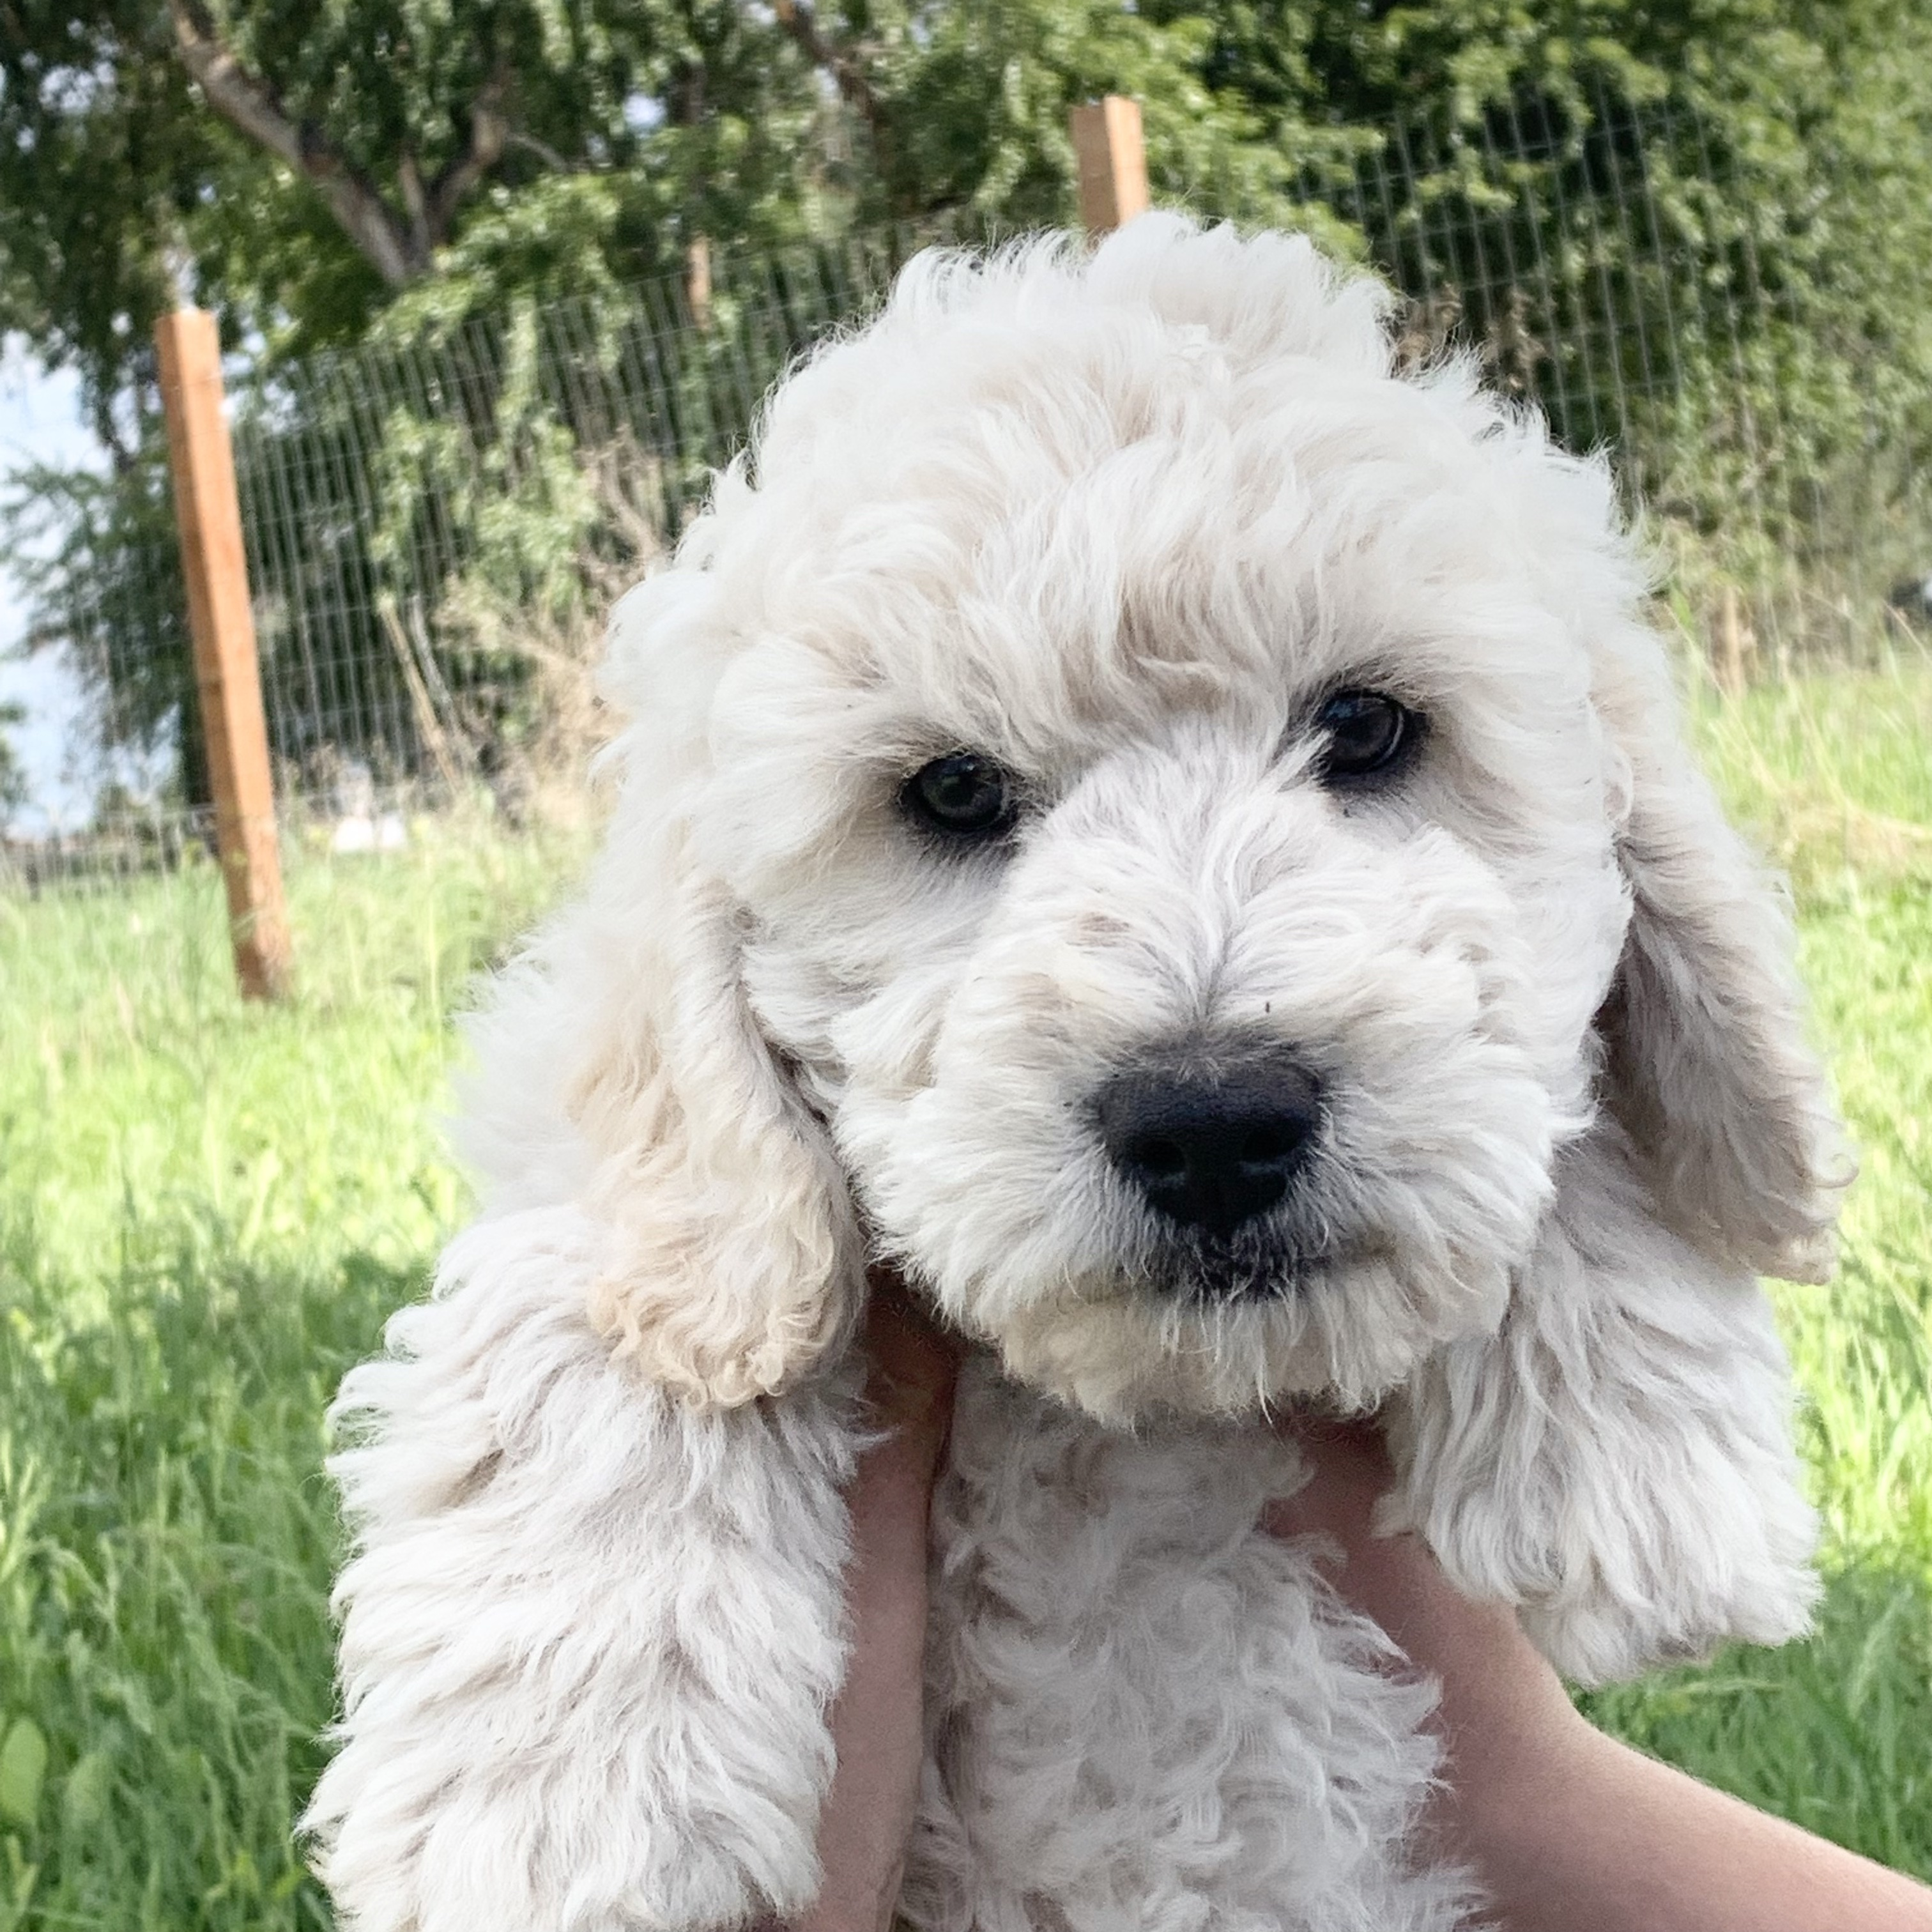 GOLDENDOODLE PUPPIES 10 weeks, super  GOLDENDOODLE PUPPIES 10 weeks, super friendly, no shed, only 3 left! One white, two silver phantom. Mid size, 40 Lbs as adults. Health guaranteed, vet checked, dewormed, shots, come choose your puppy! $1900 More details on our website: www.inlandoodles.com Call/Text 509-339-5698